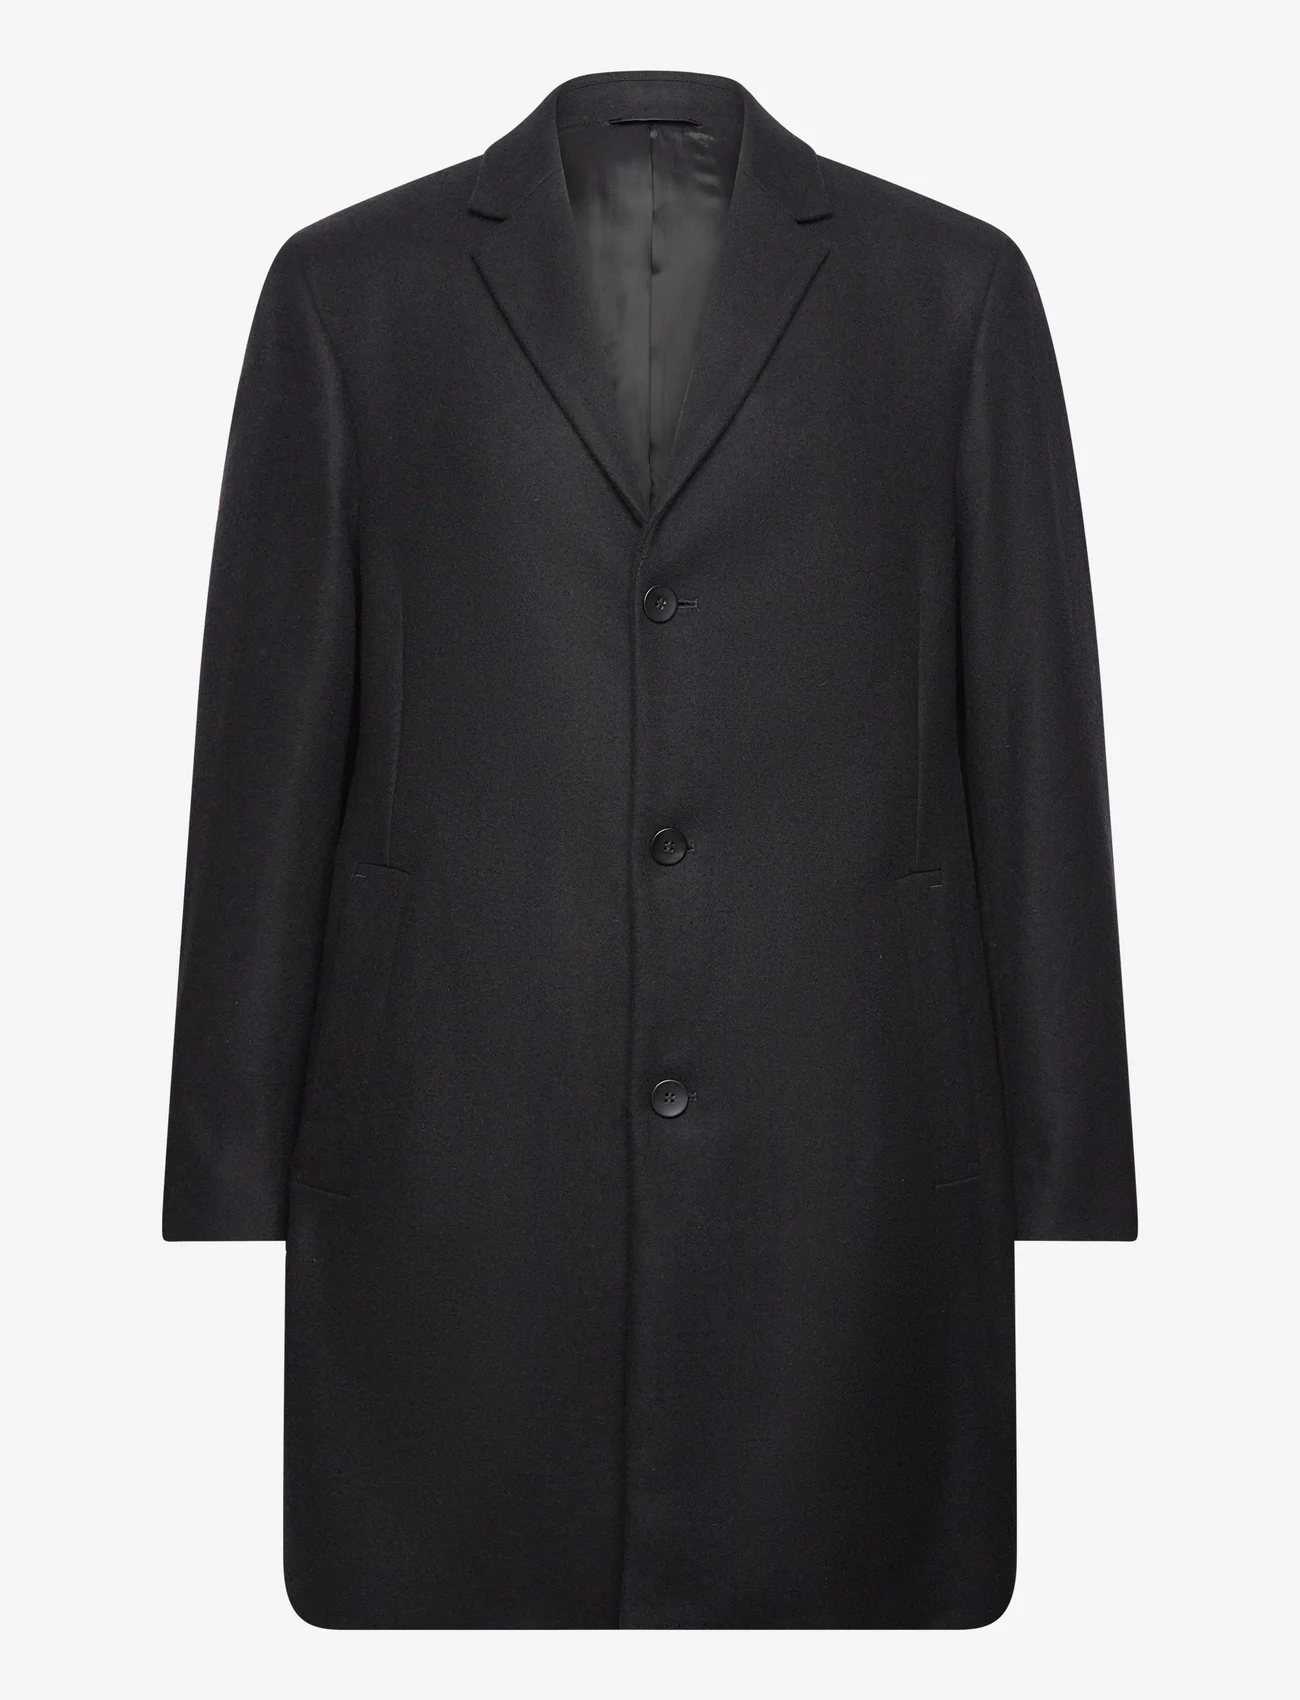 Calvin Klein - RECYCLED WOOL CASHMERE COAT - winter jackets - ck black - 0